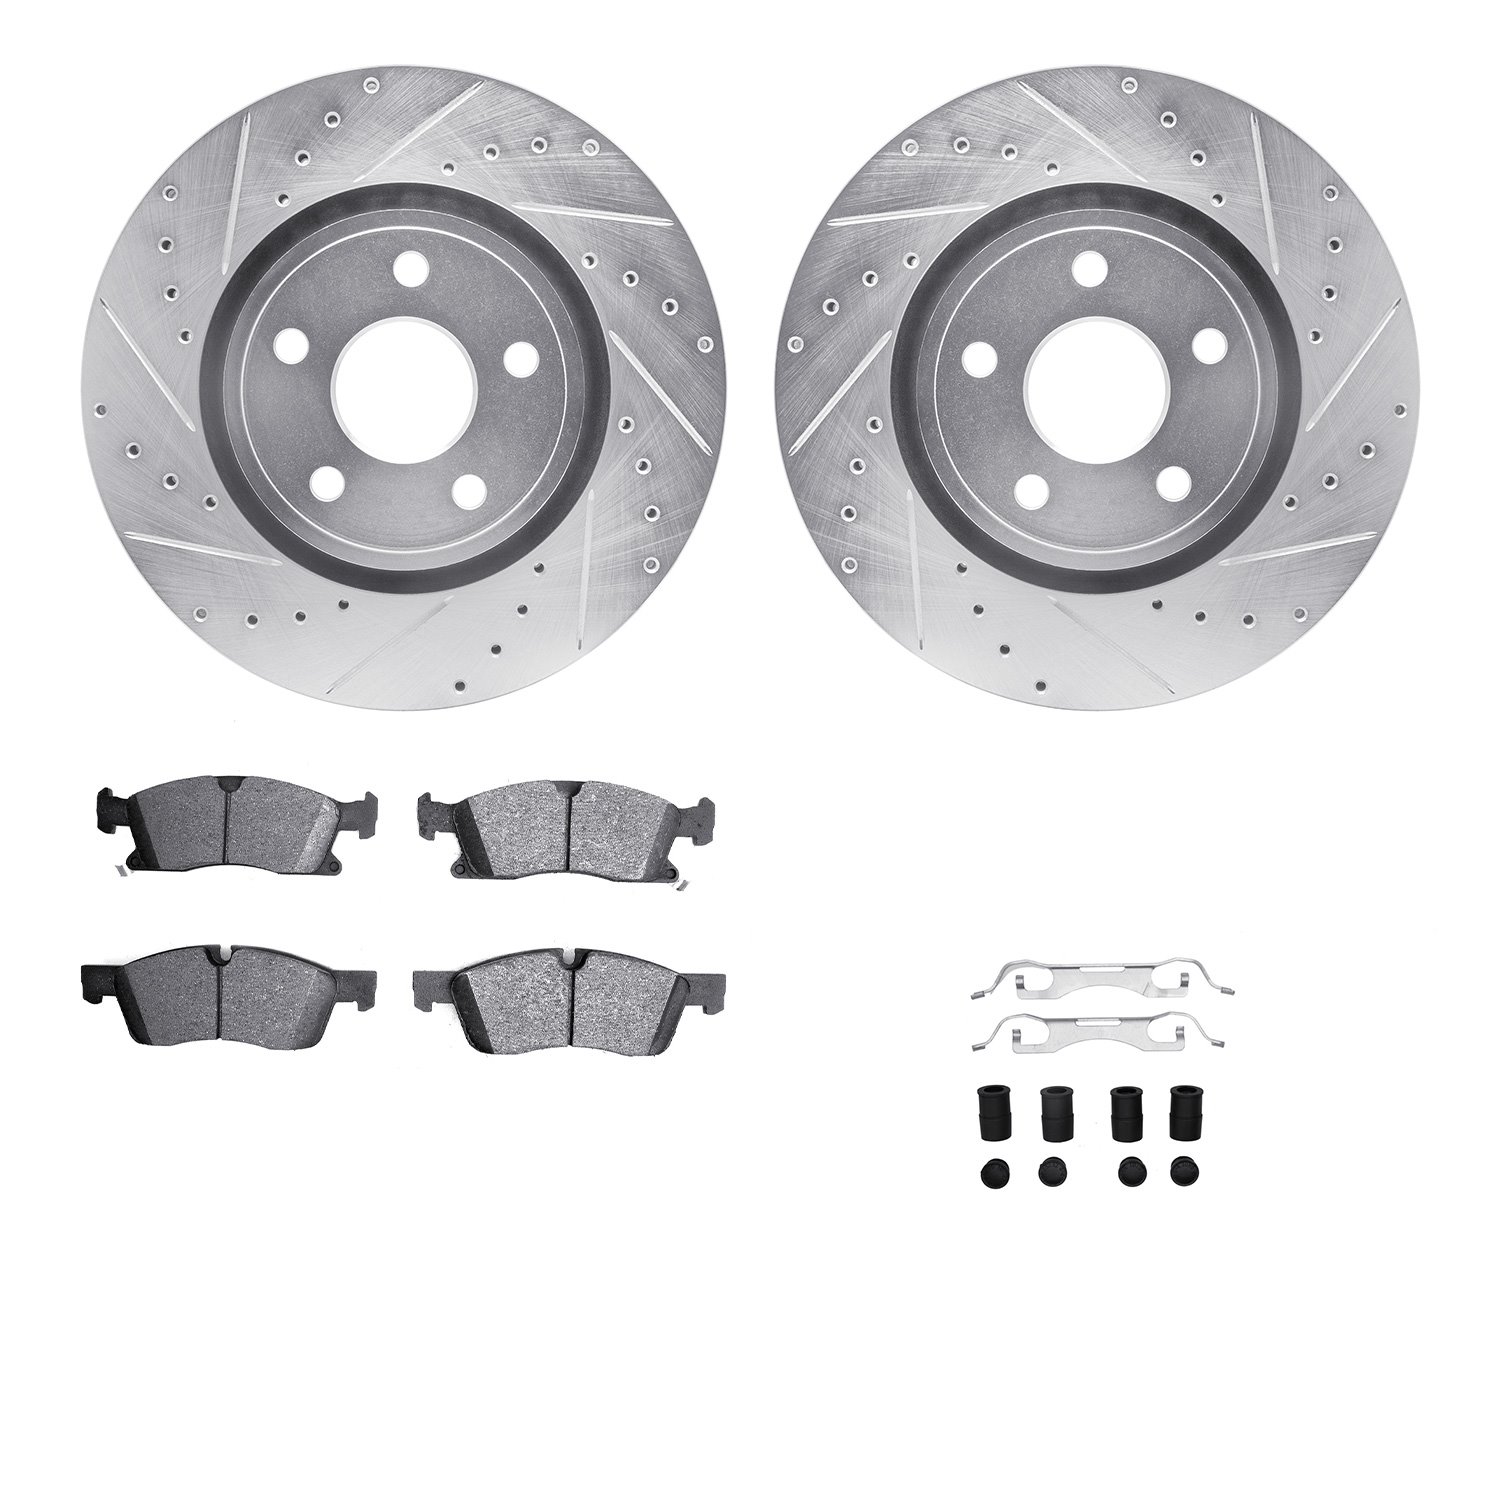 7412-42009 Drilled/Slotted Brake Rotors with Ultimate-Duty Brake Pads Kit & Hardware [Silver], Fits Select Mopar, Position: Fron